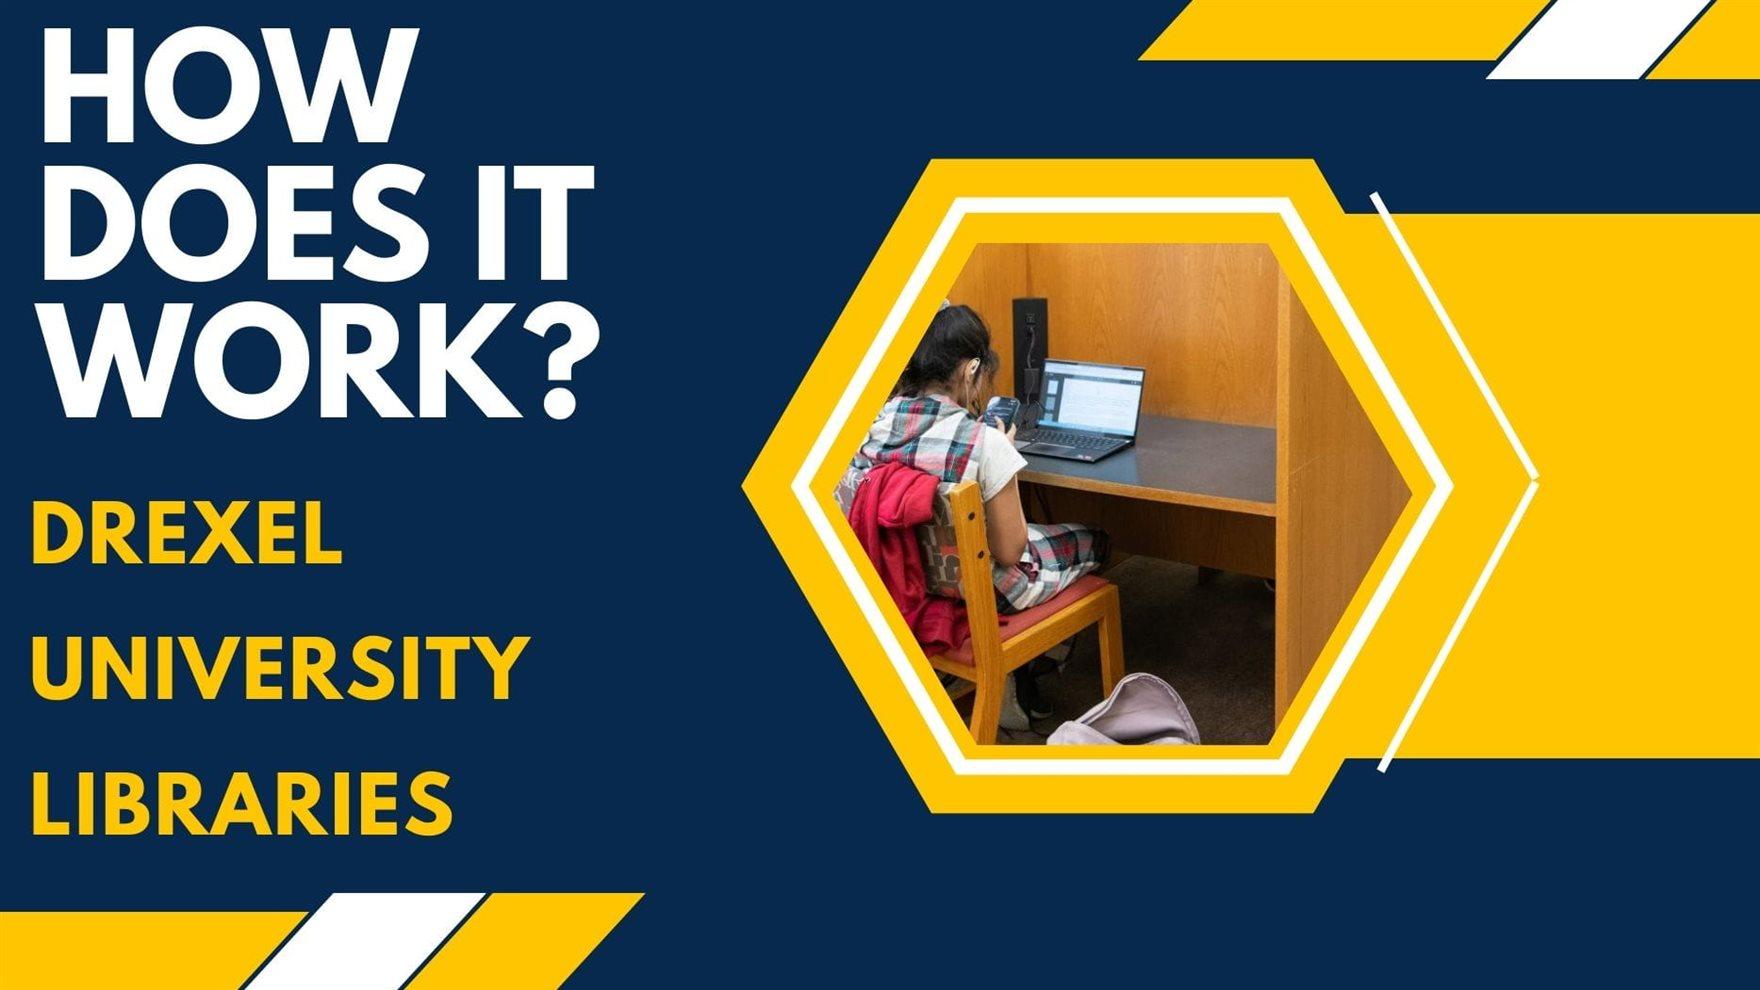 &quot;How Does it Work? Drexel University Libraries&quot; and a picture in a hexagon of a student in a wooden desk and chair area with a laptop.